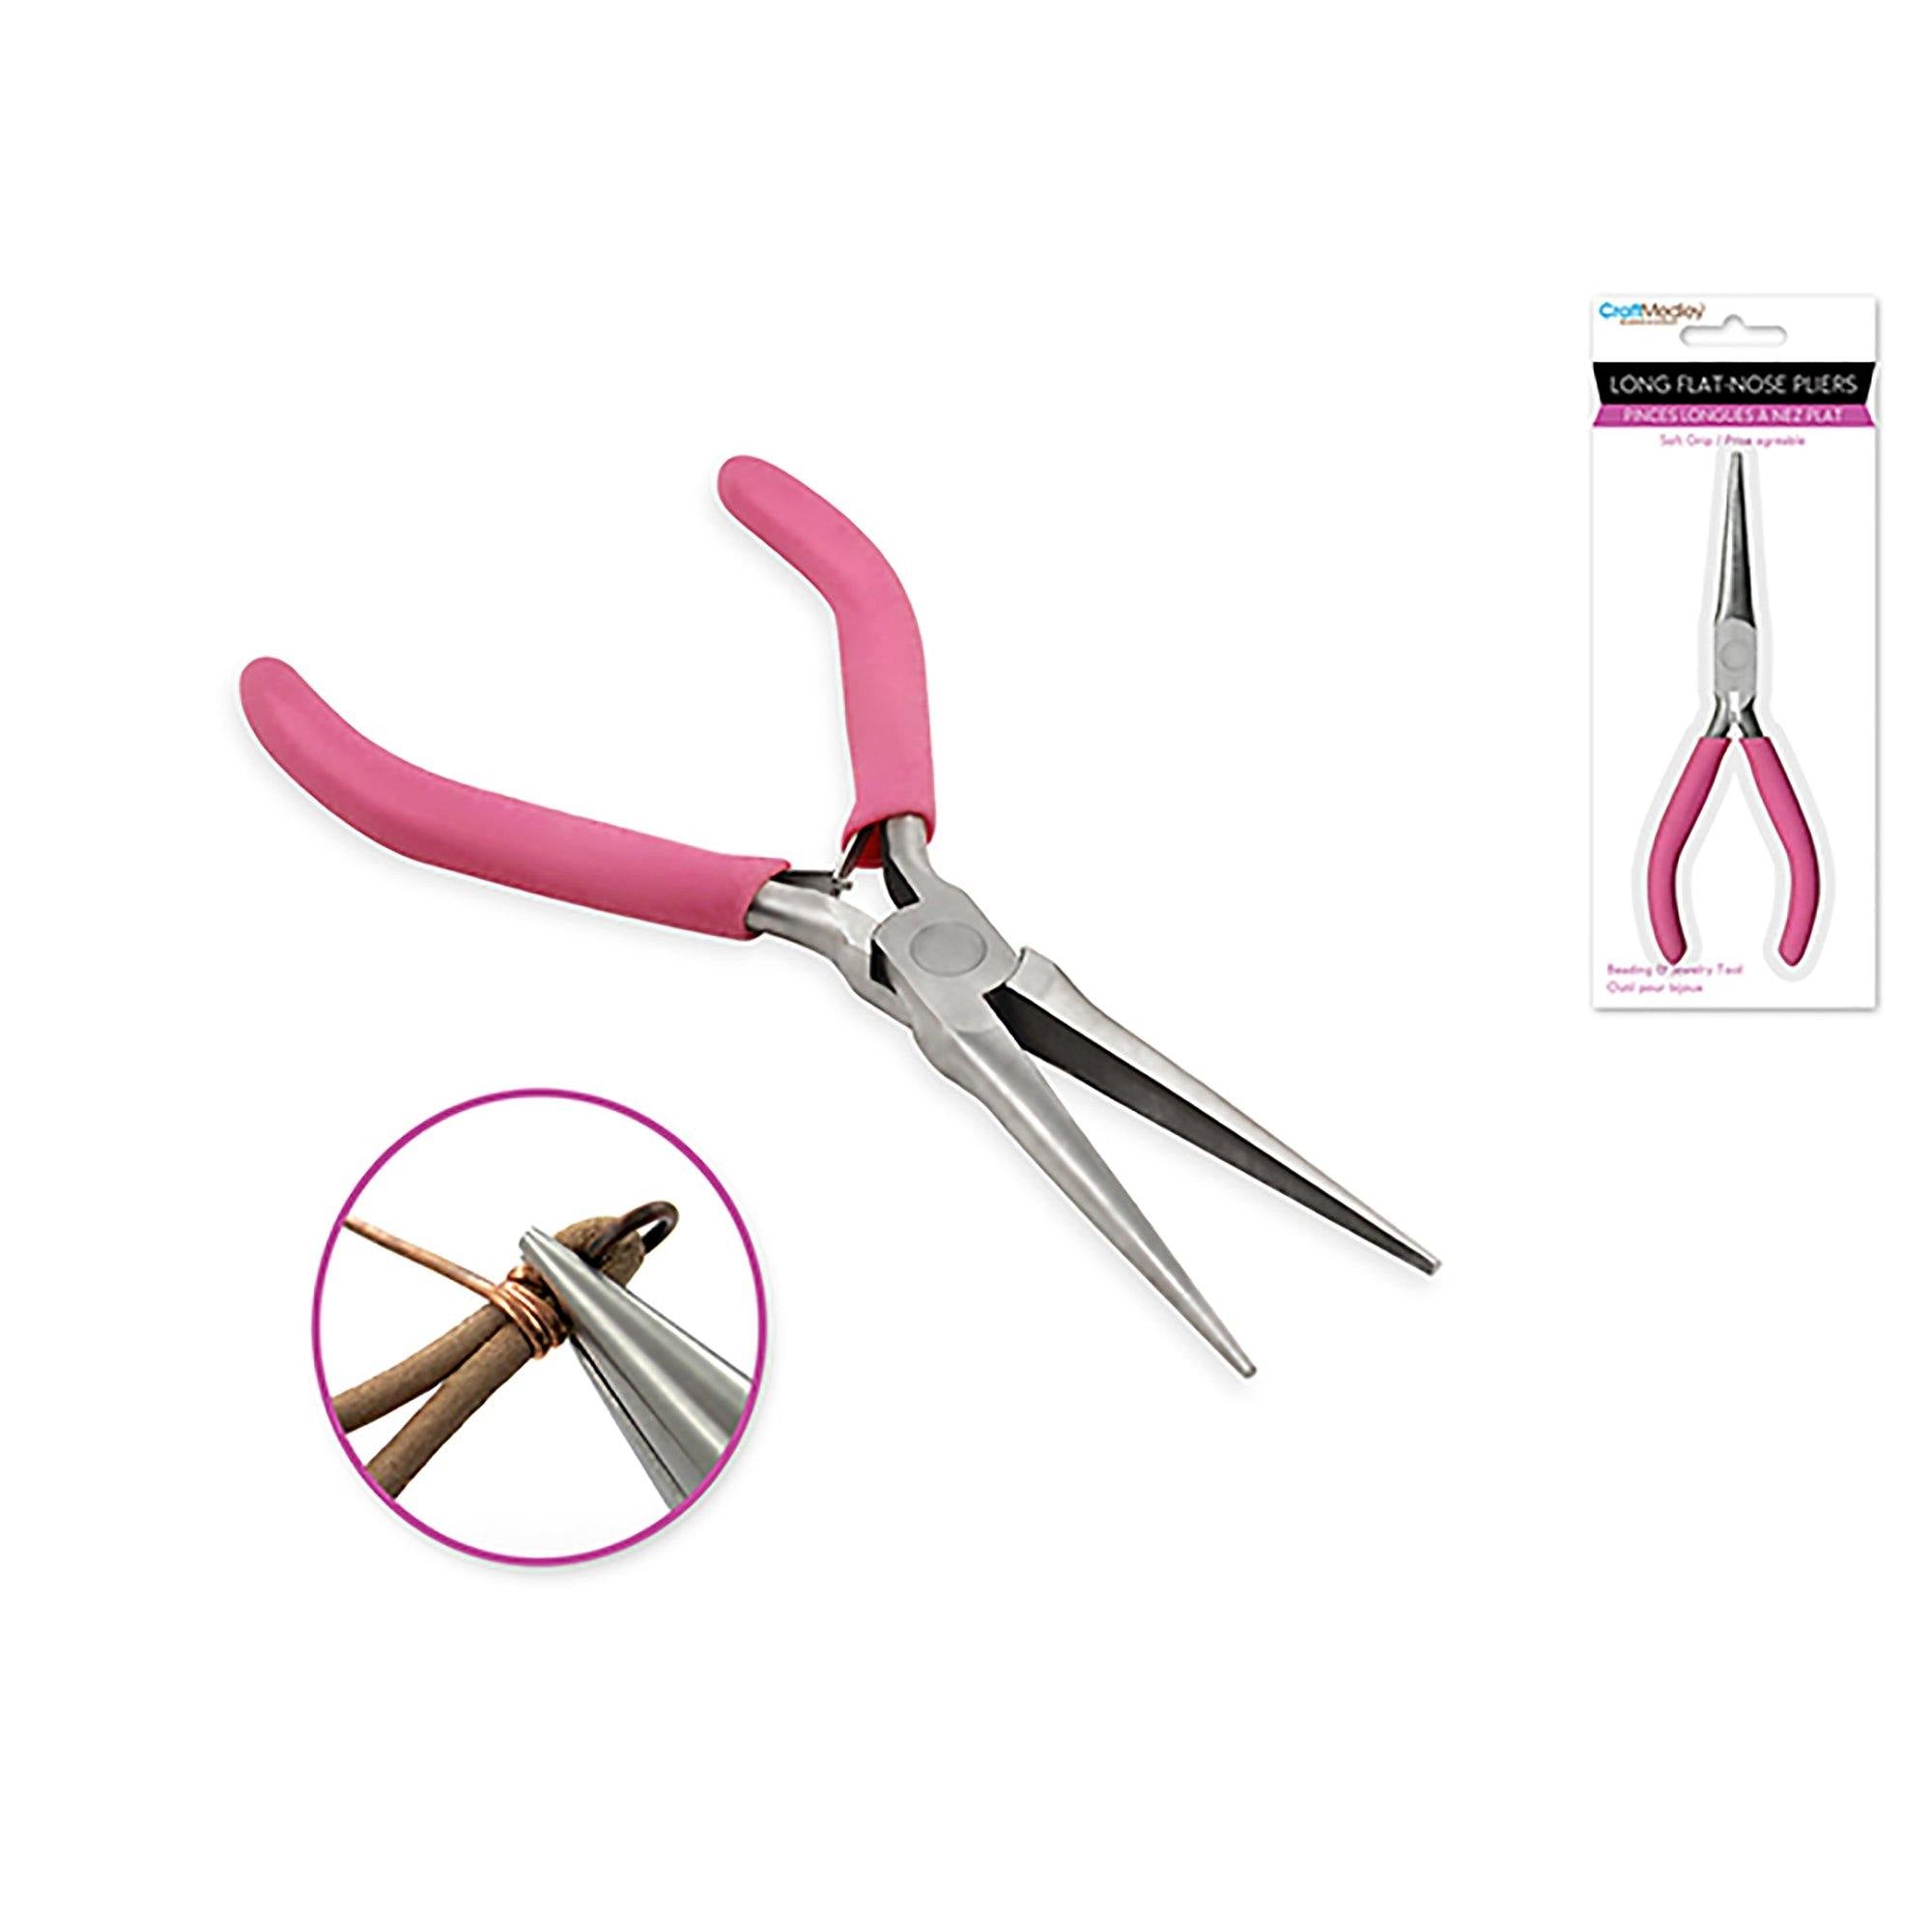 Beading / Jewelry Tool : Long Flat Nose Pliers With Soft Grip Handle - Dollar Max Dépôt